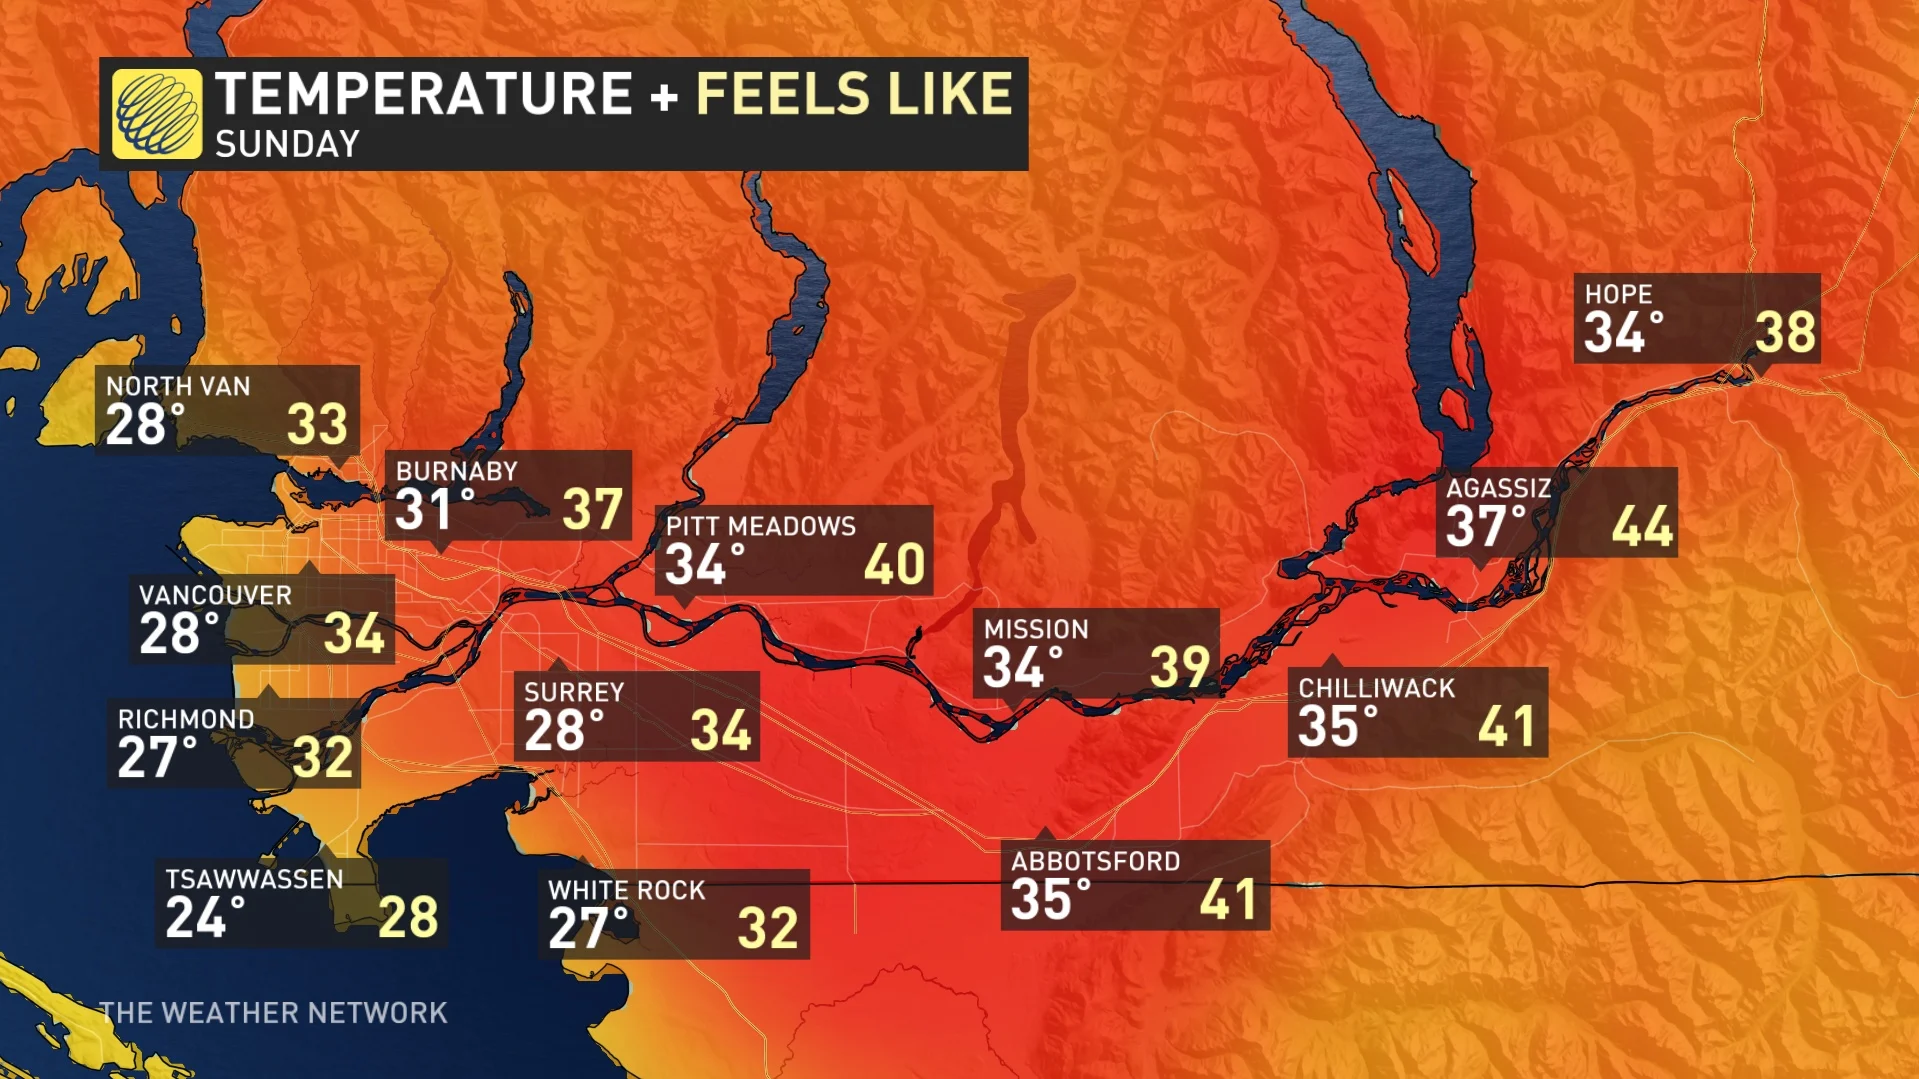 B.C. Sunday temperatures and feels-like values